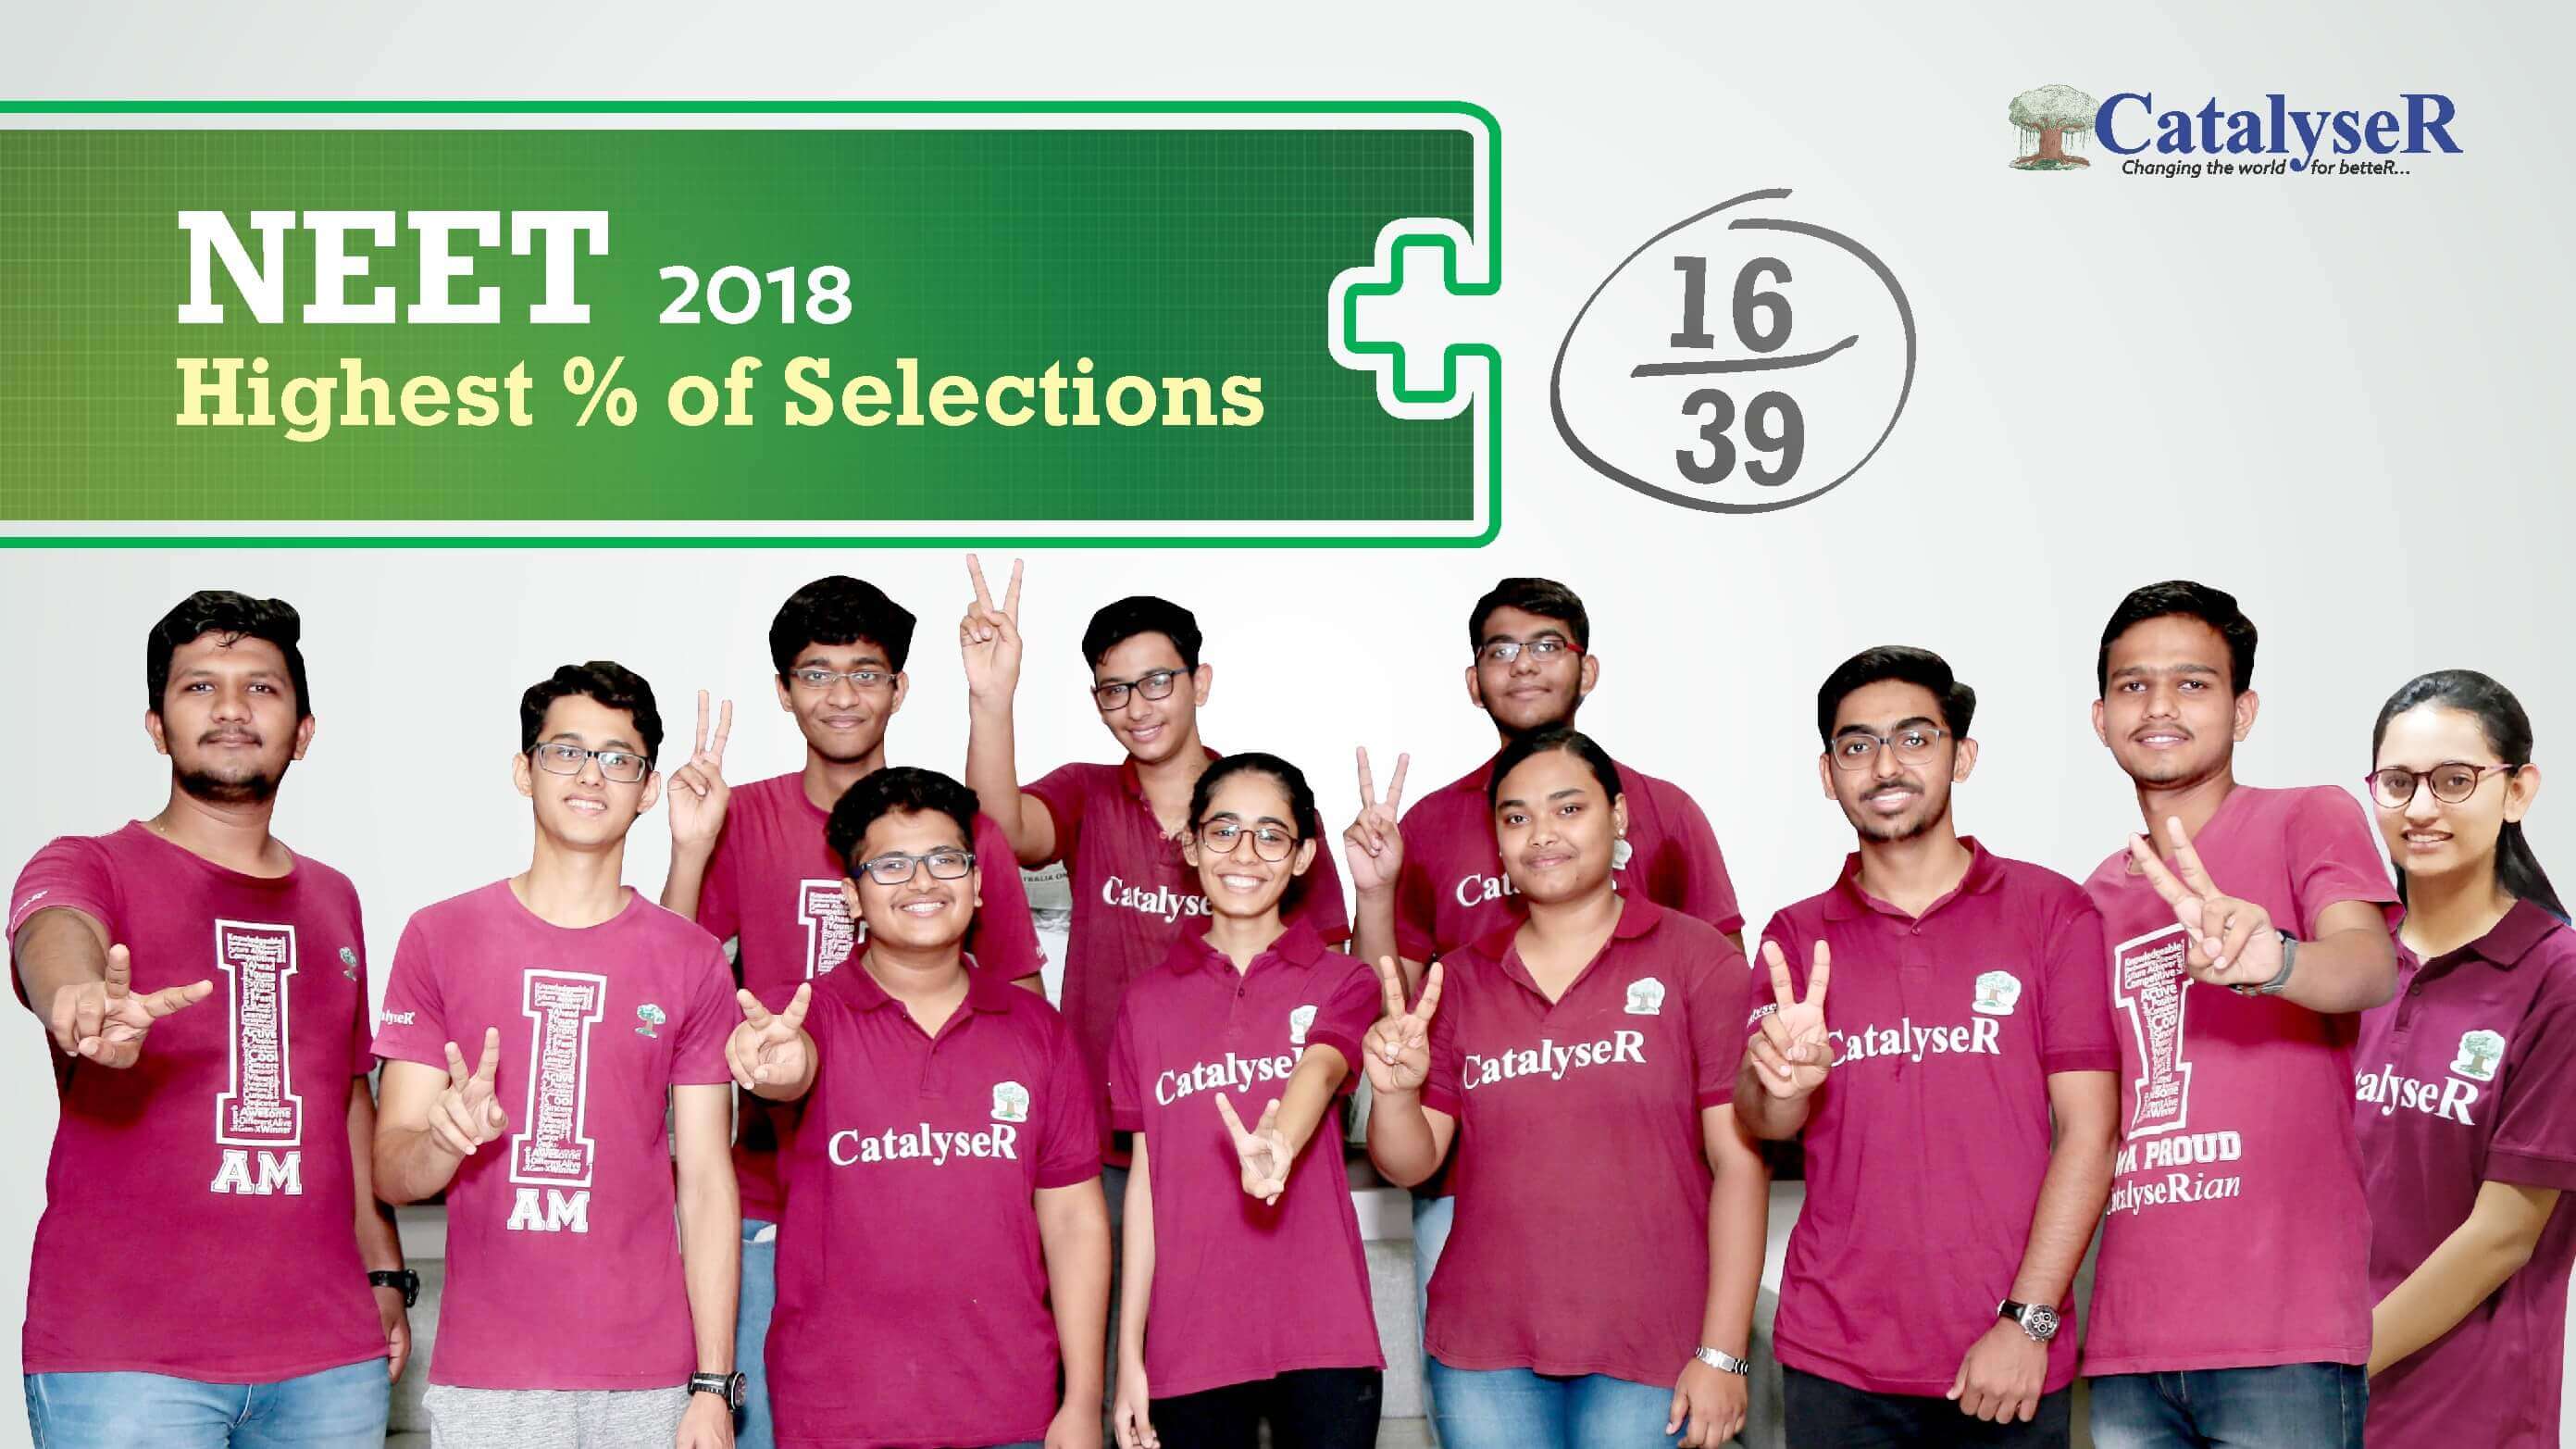 Neet 2018 highest percentage of selection 39 out of 16 at catalyser classes